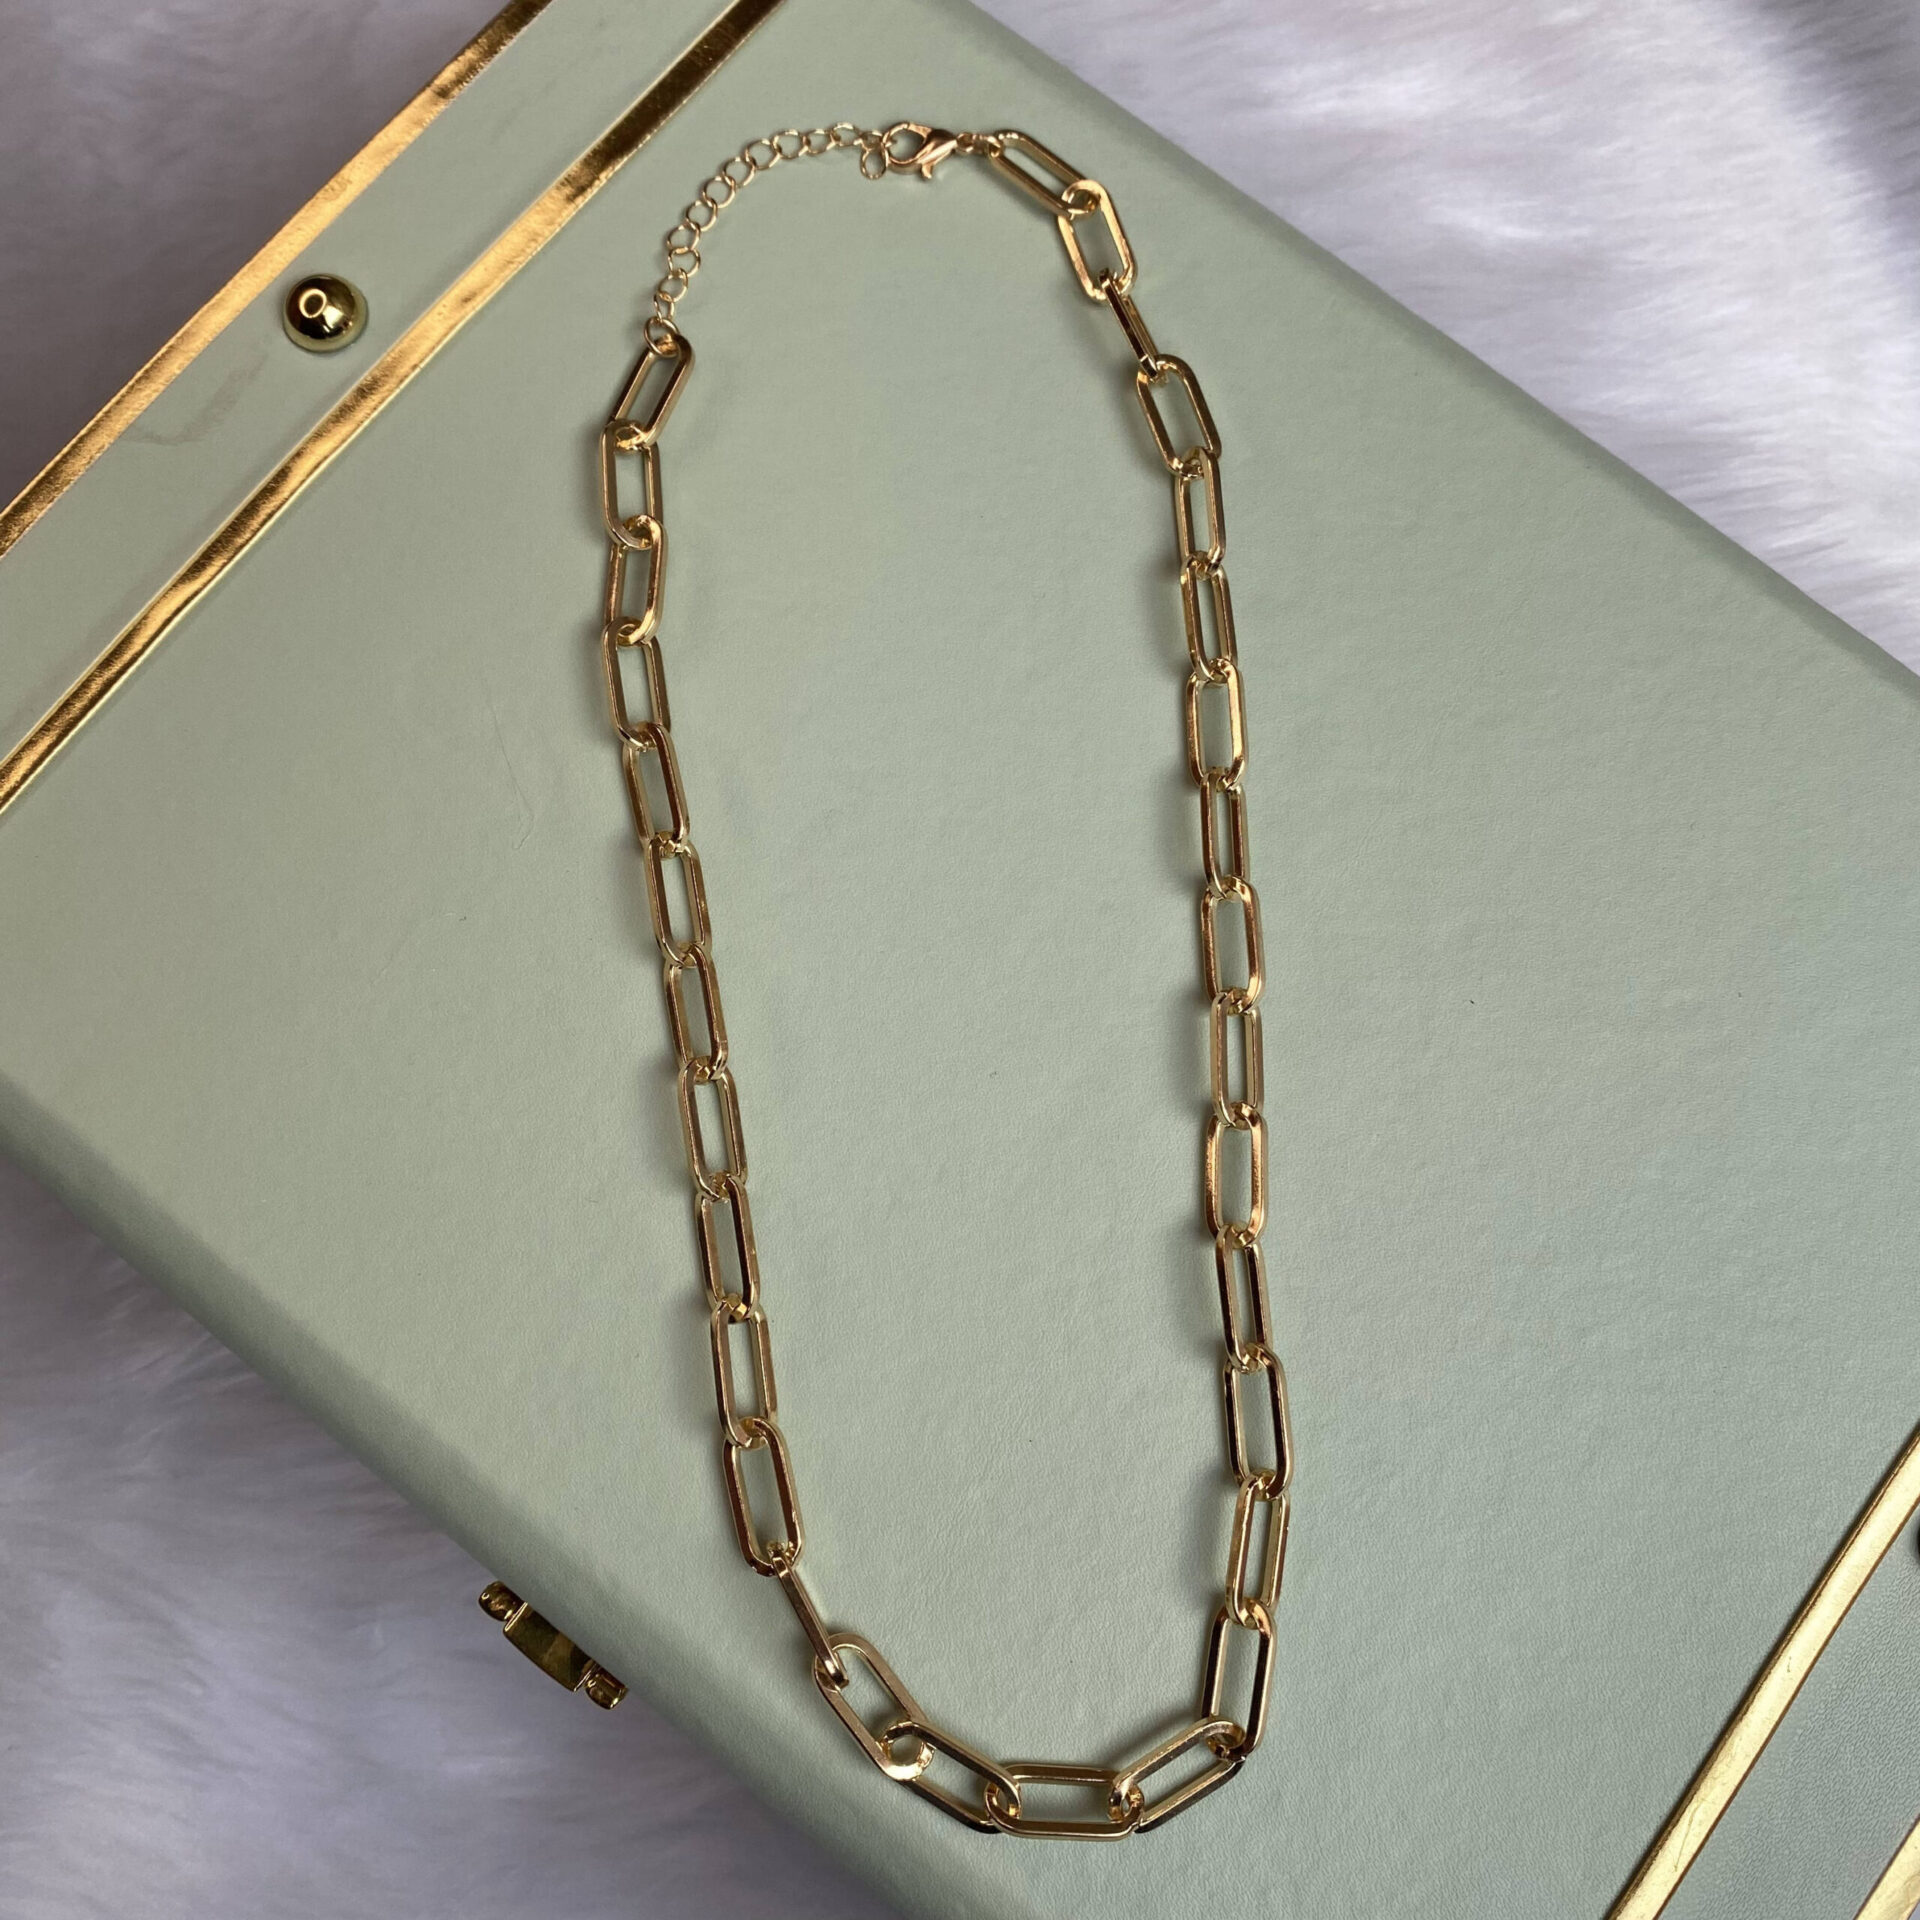 Golden Neck Chain – All About Her